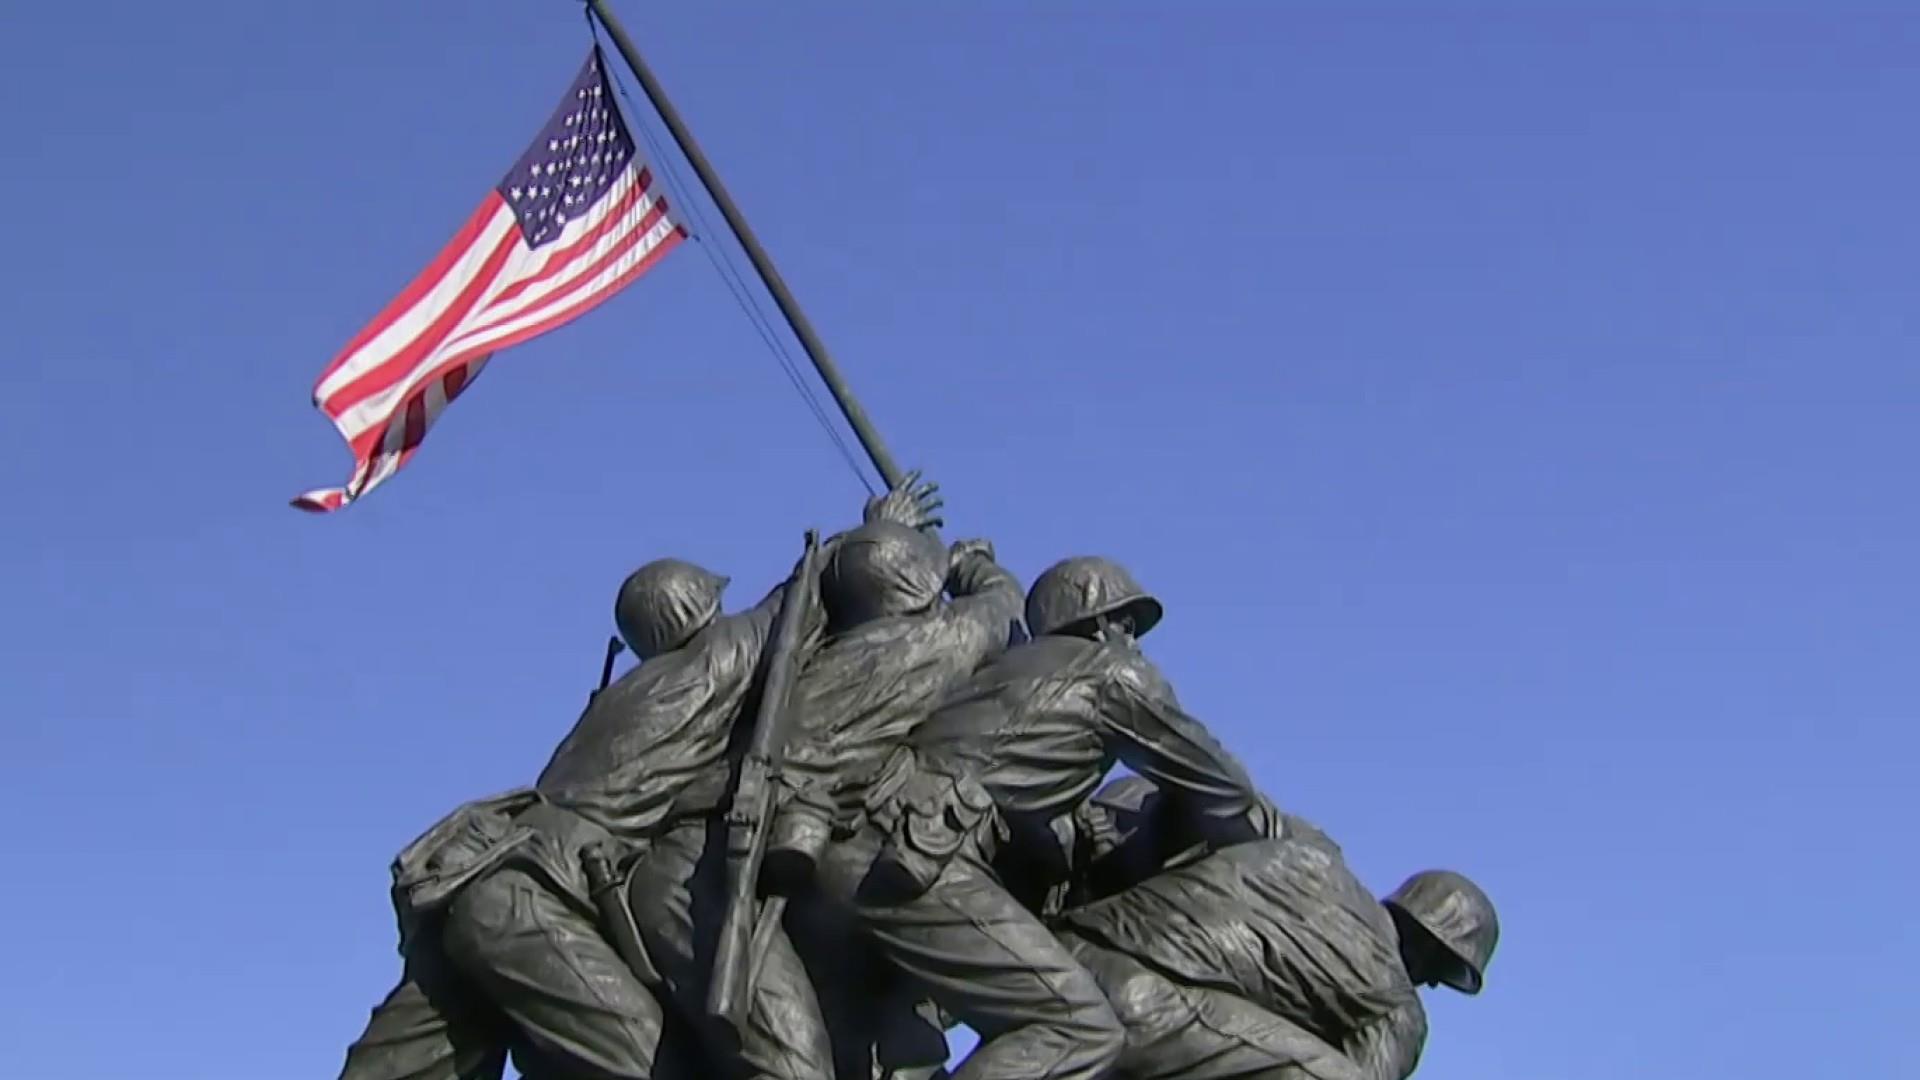 NBC News Exclusive: Marines say one of the men in iconic Iwo Jima flag  raising photo was misidentified